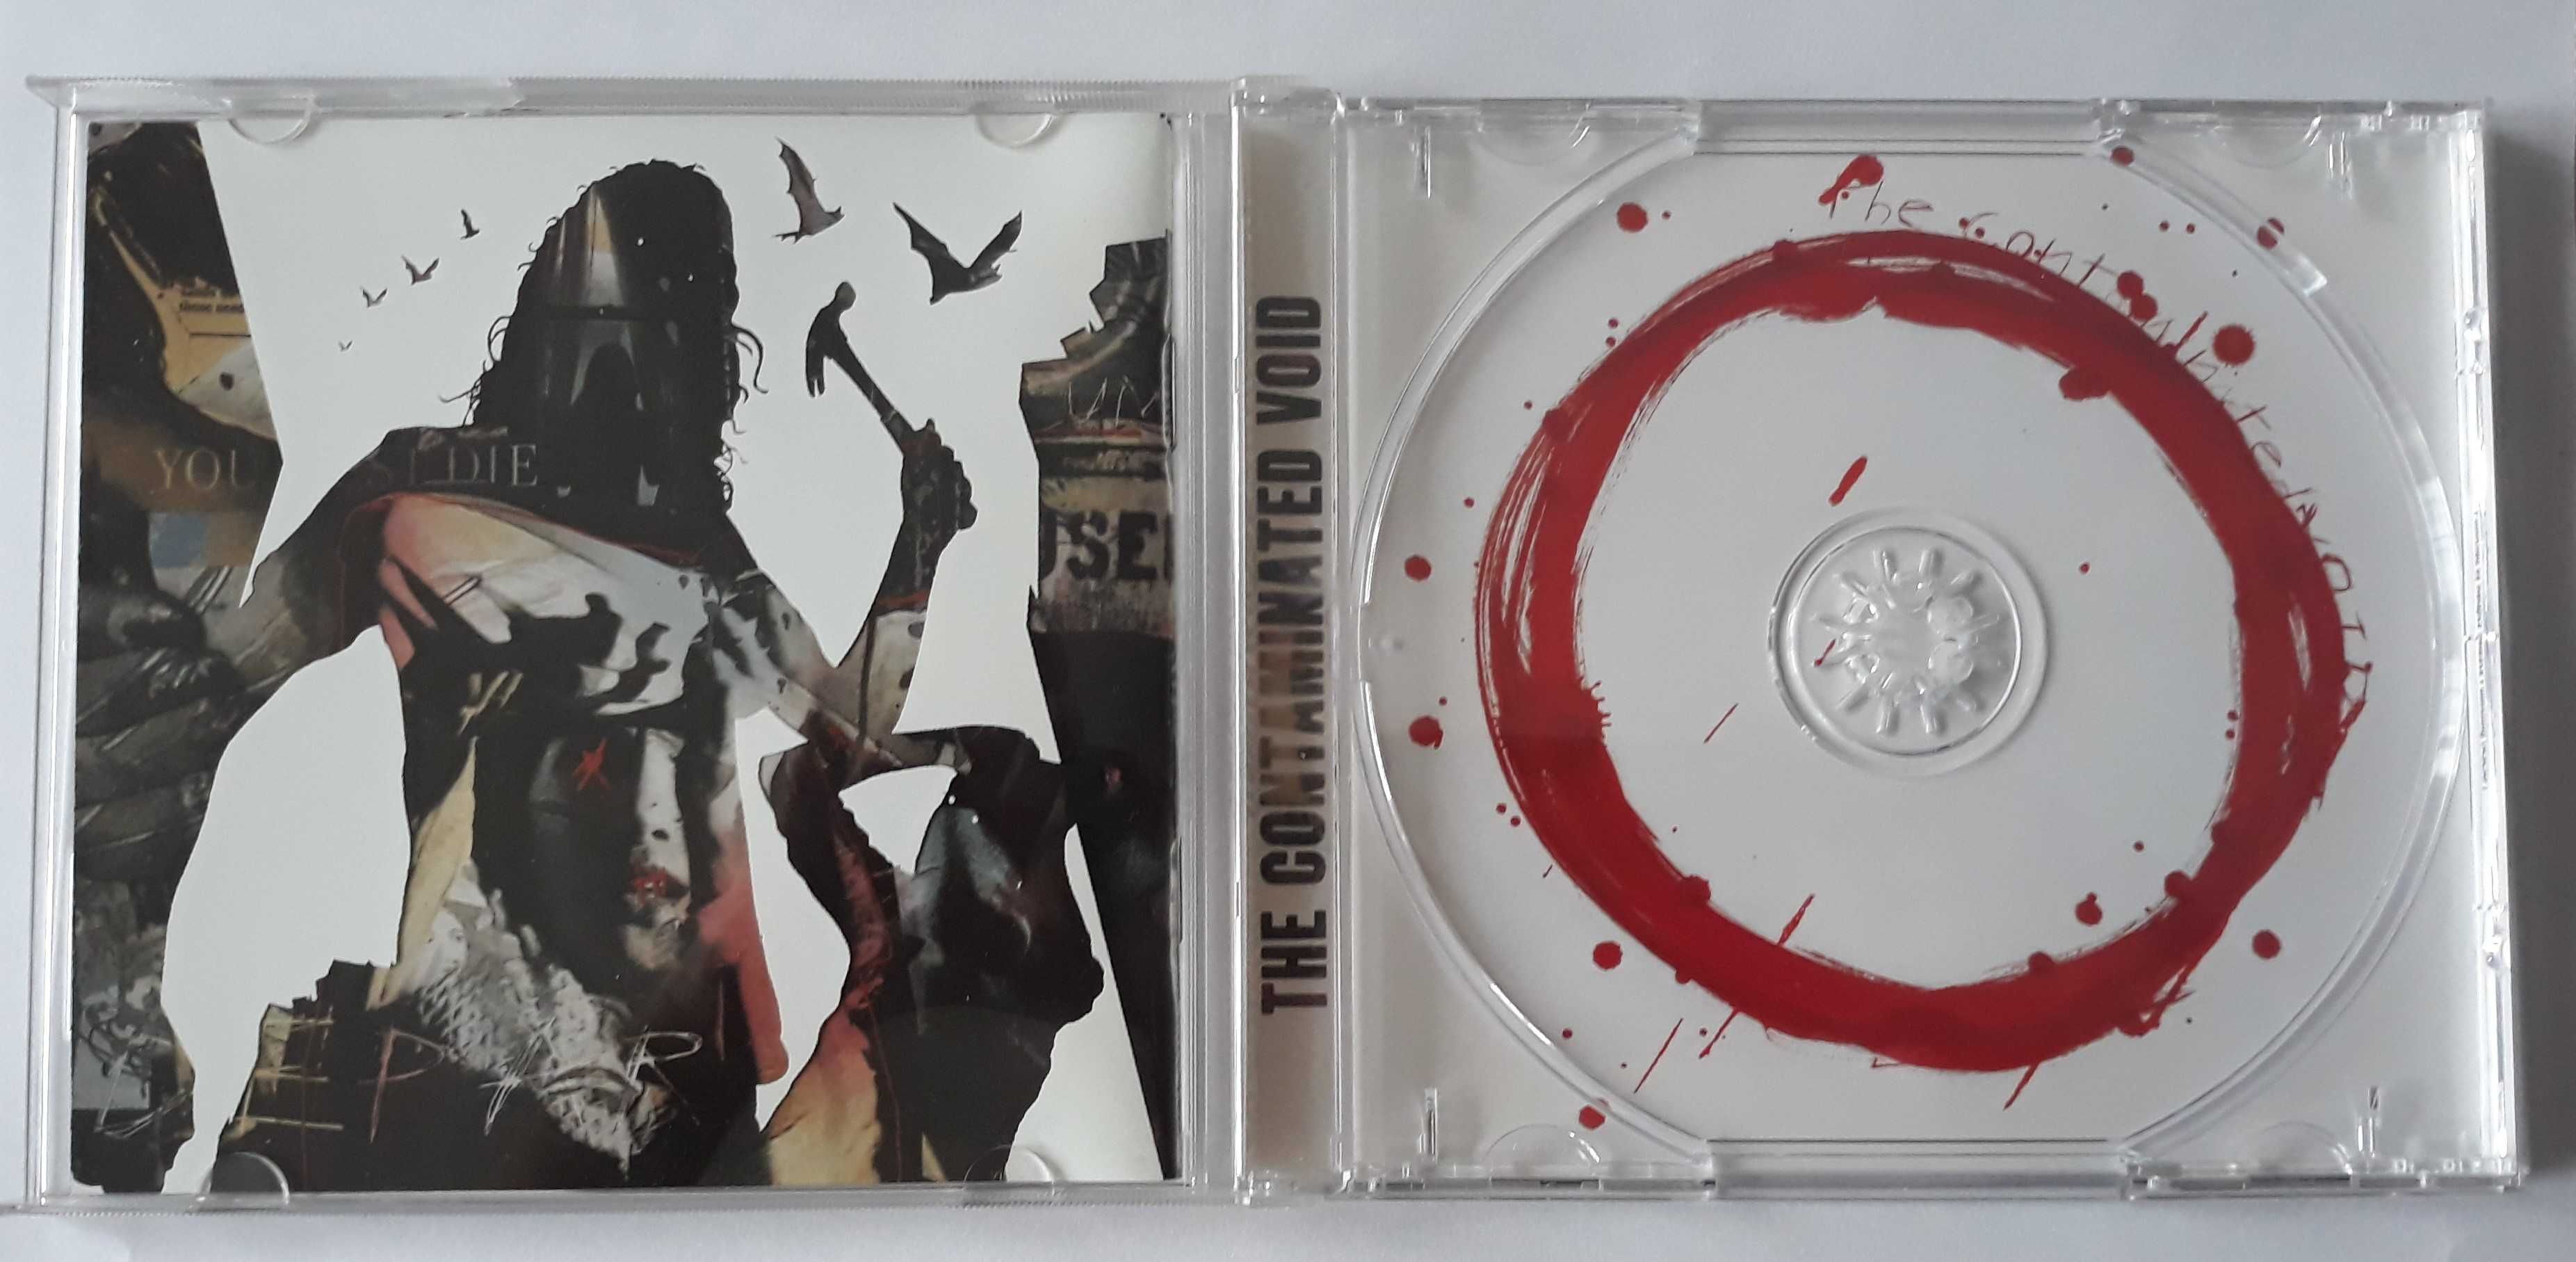 Coldworker ‎– The Contaminated Void - płyta CD (grind core)